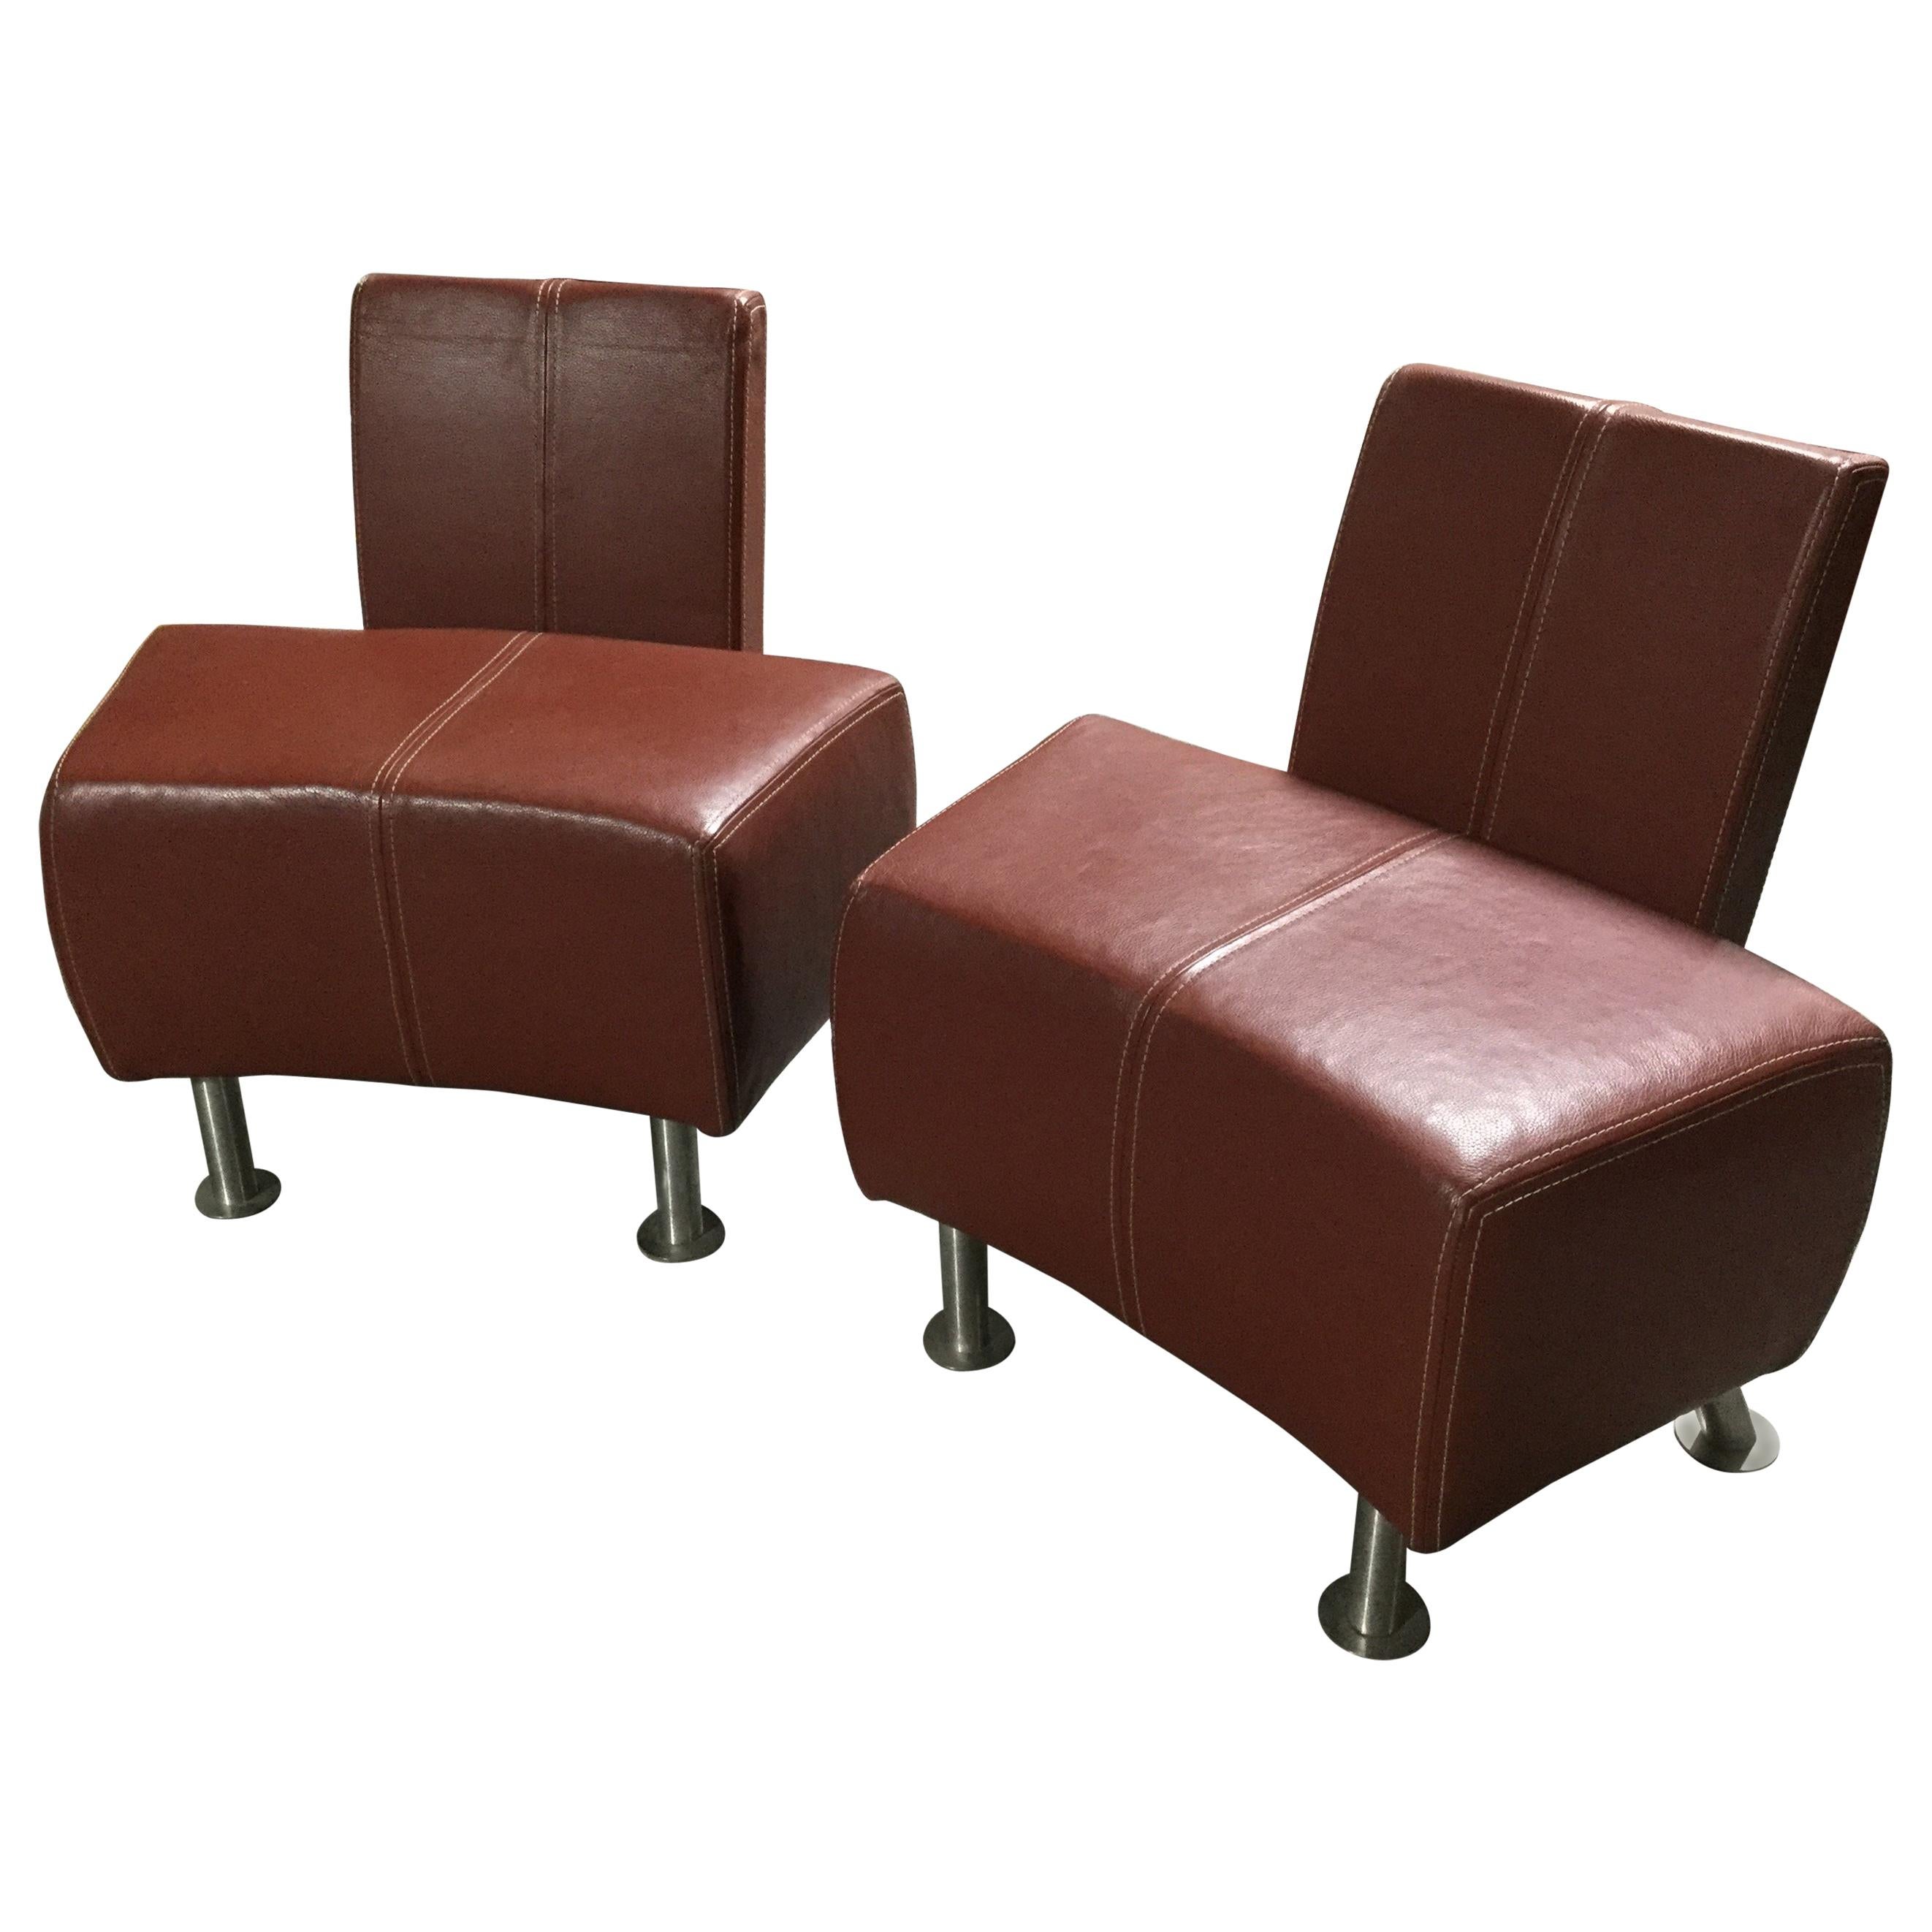 Super Cool Mid-Century Modern Italian Leather Chairs